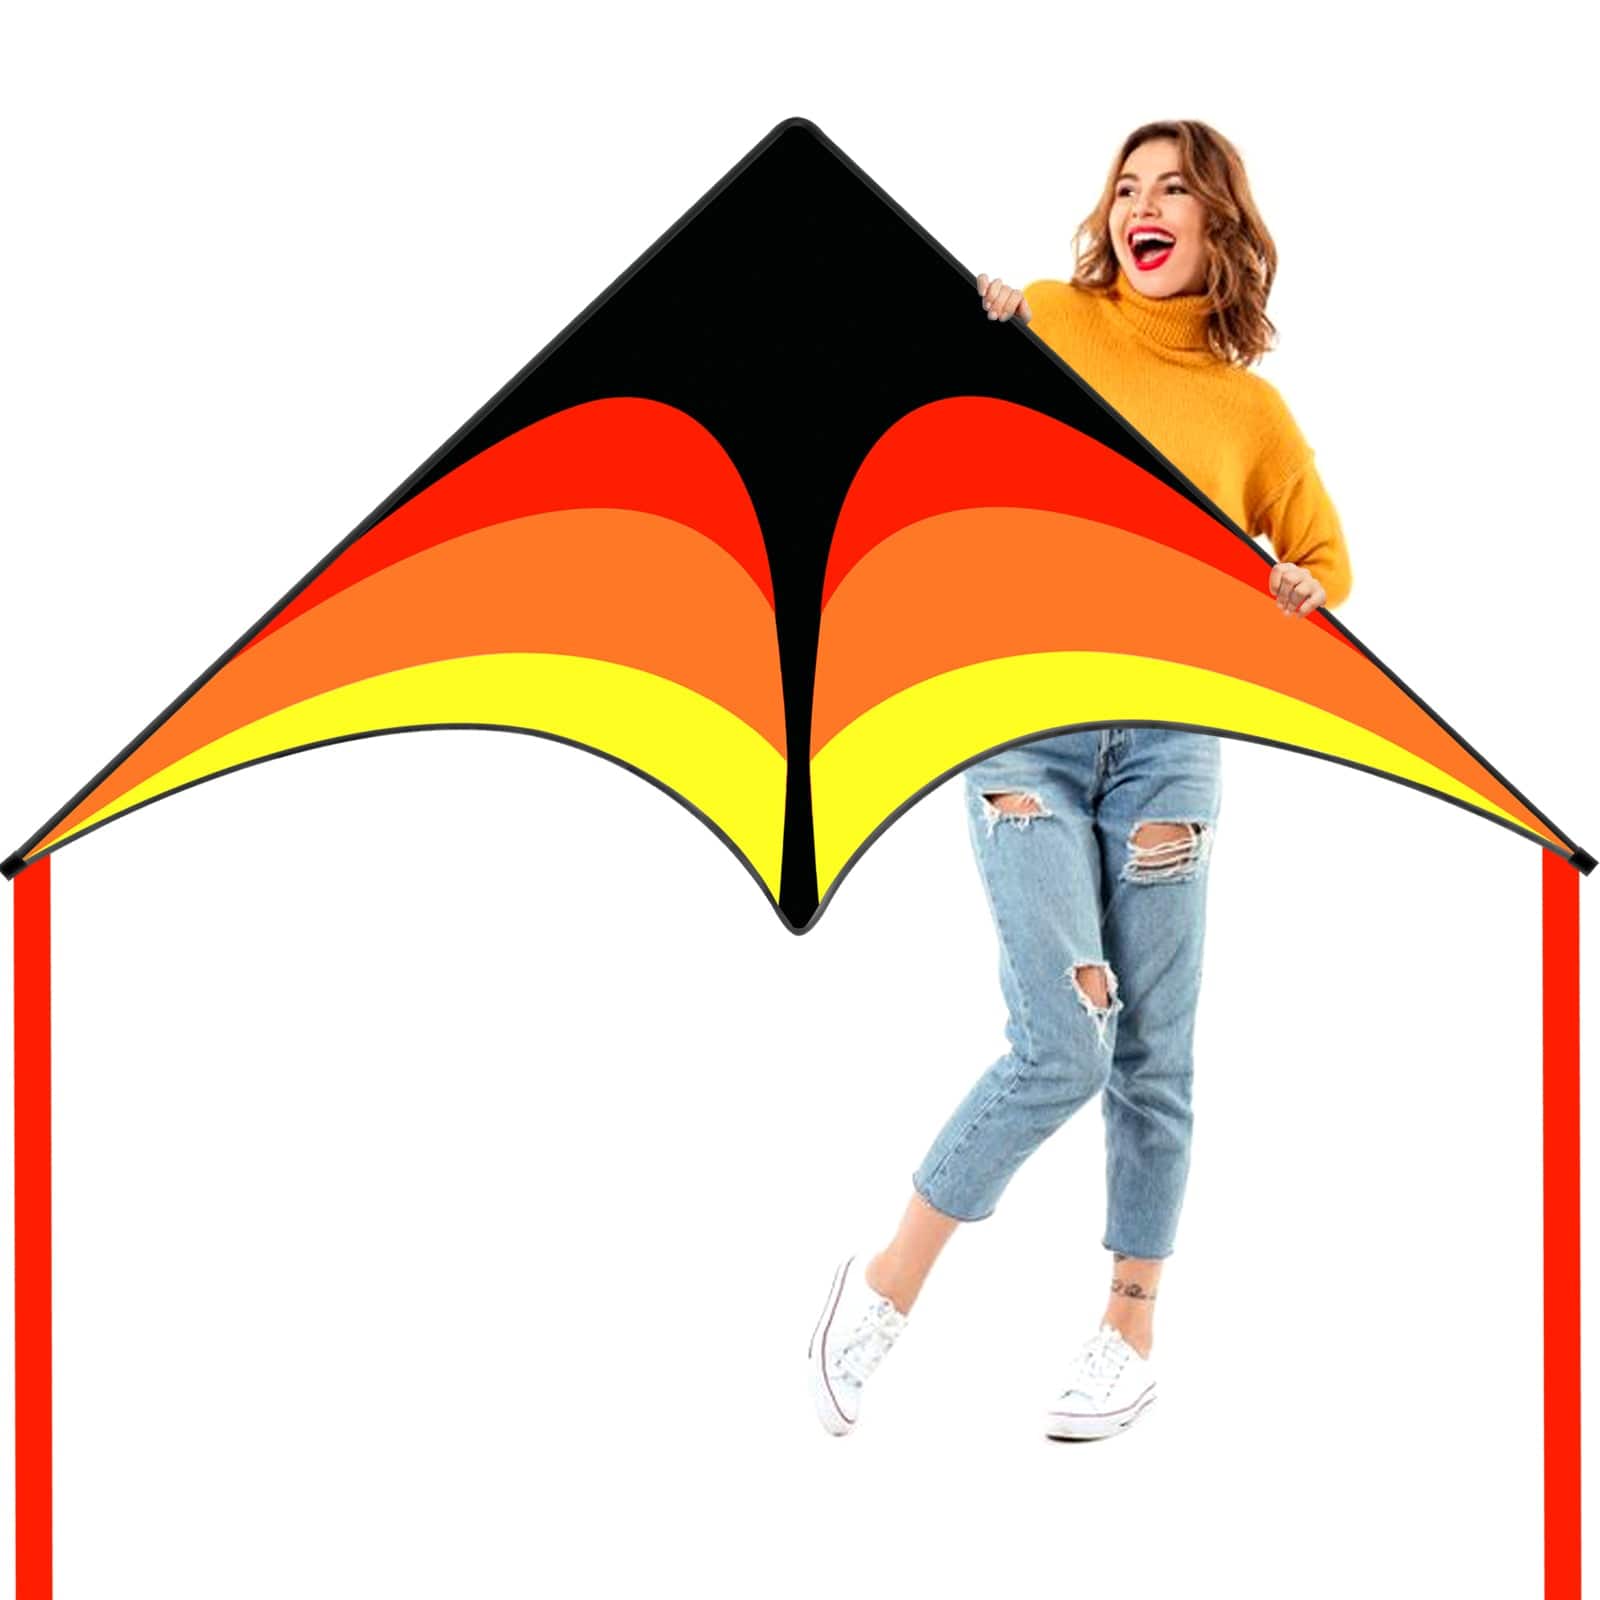 Kaiciuss Delta Kite for Kids & Adults Easy to Fly-Orange